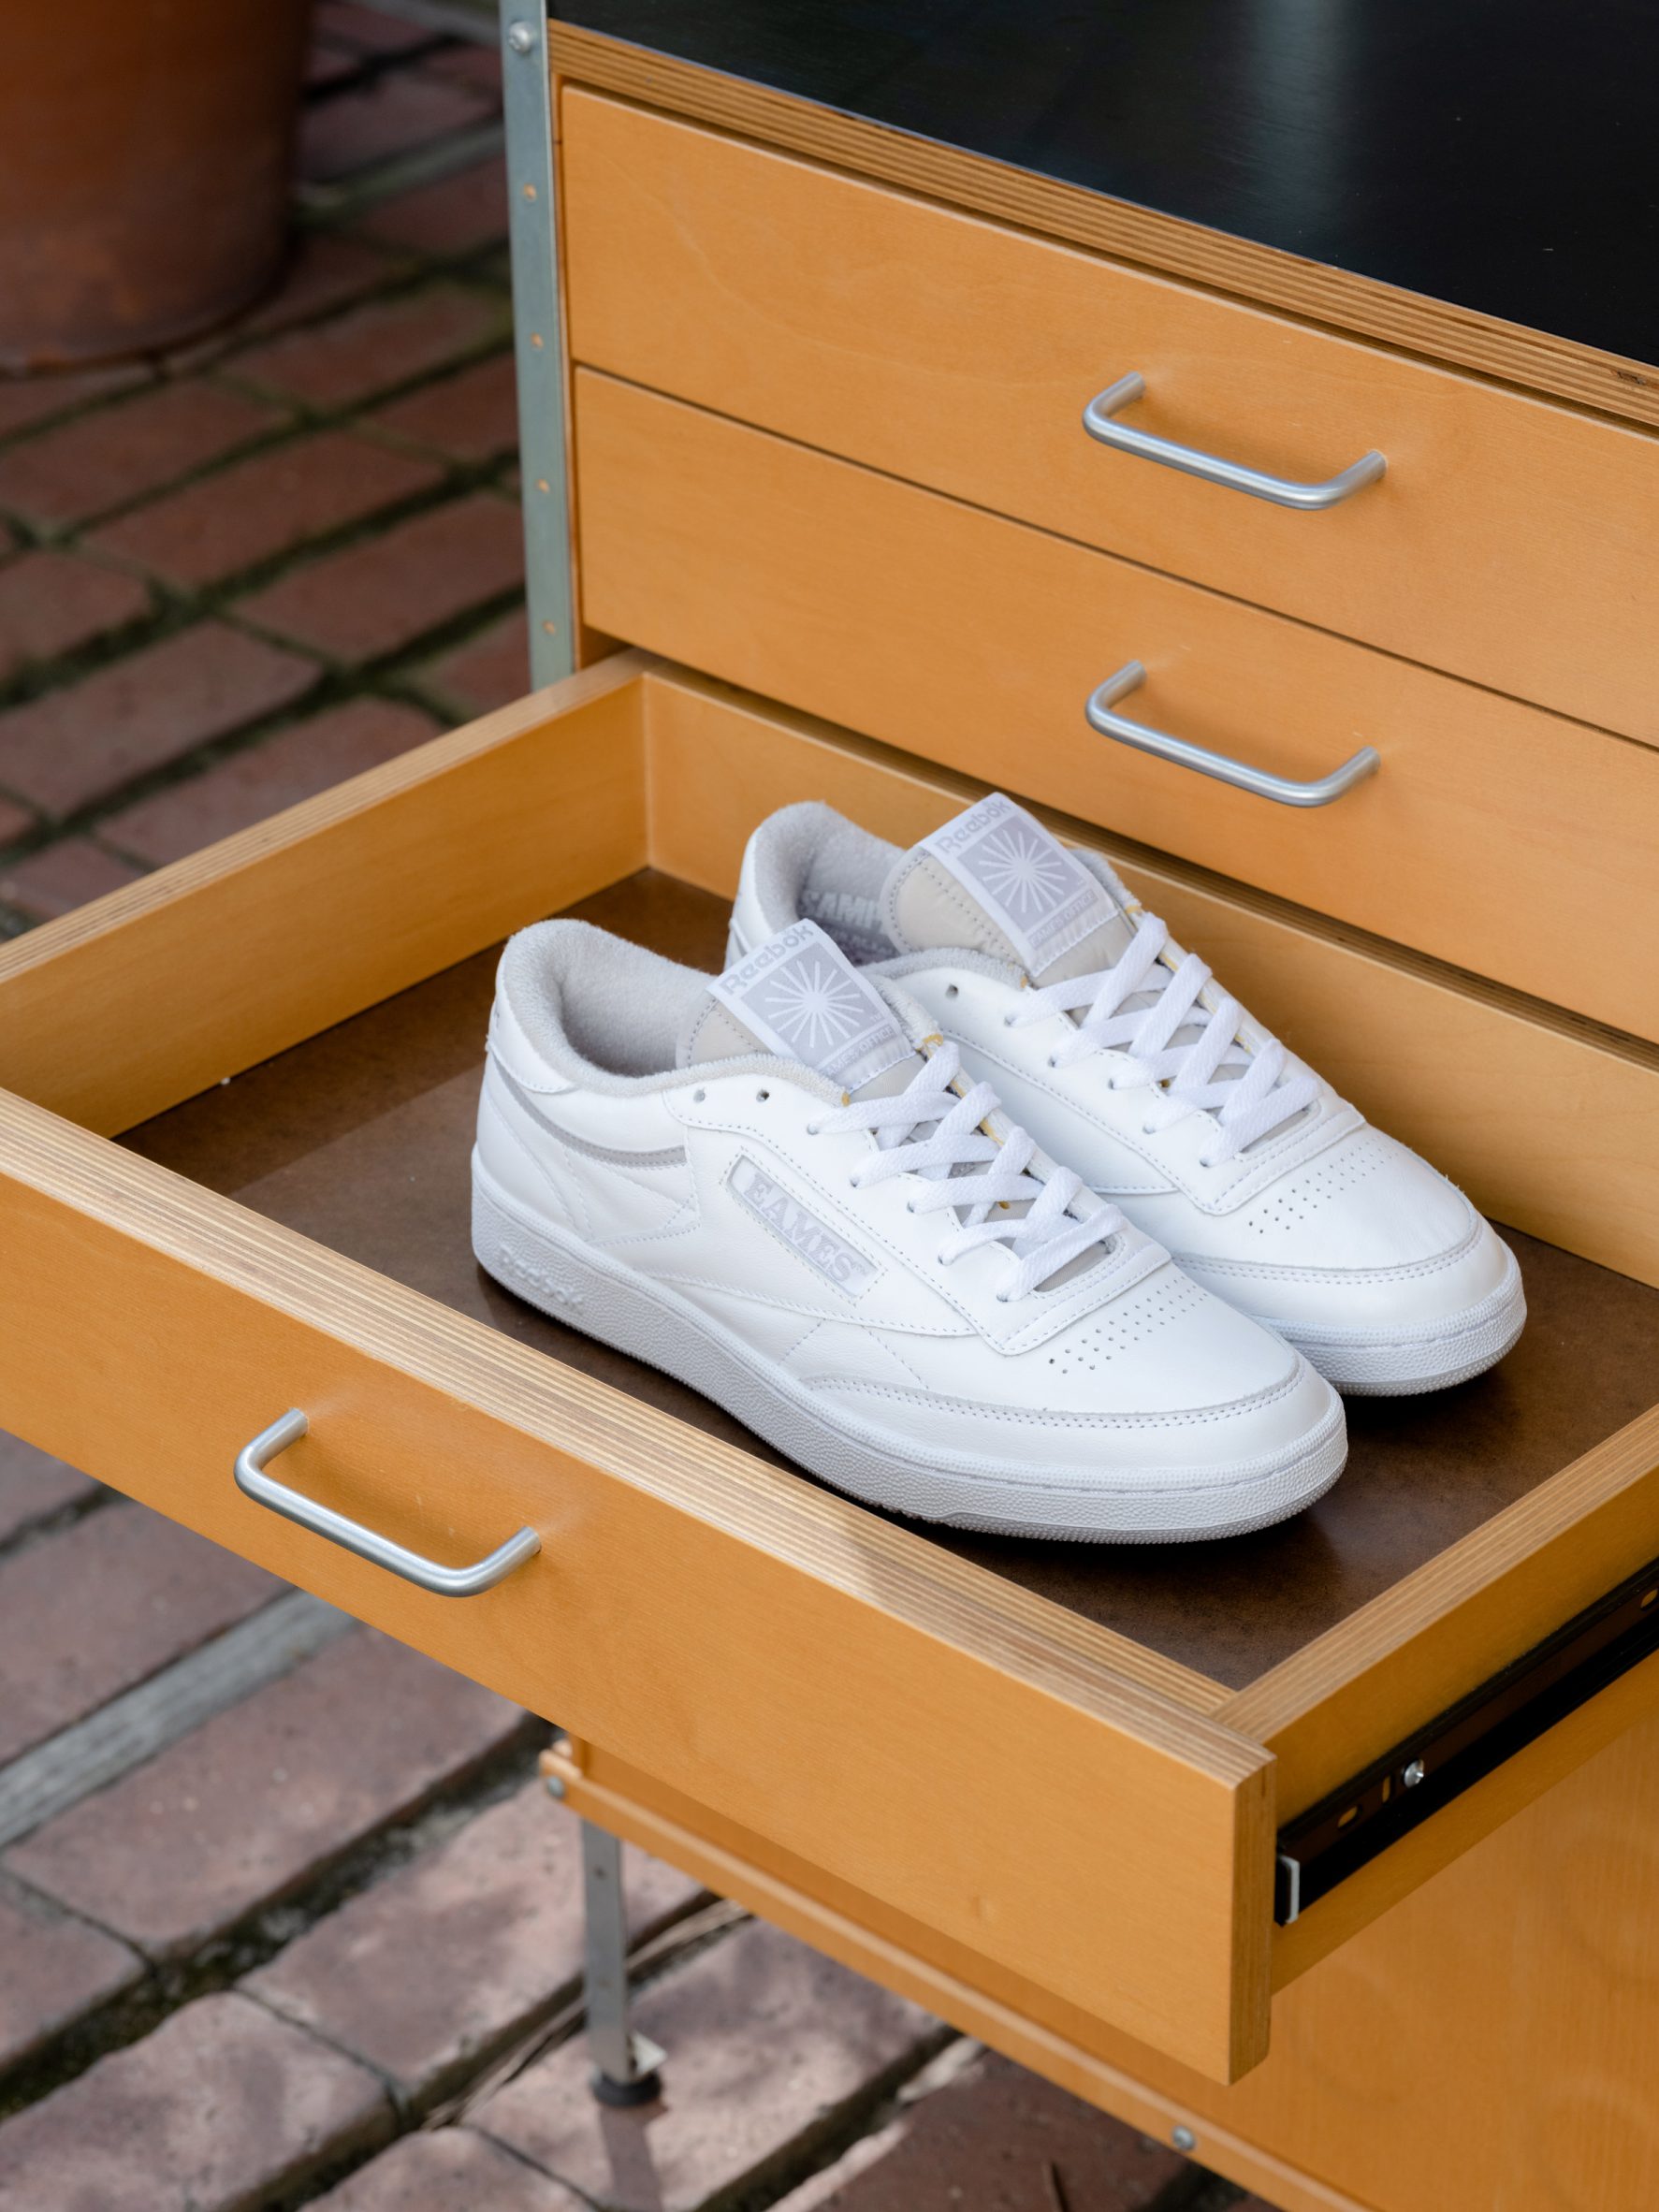 A pair of white Club C trainers in a drawer